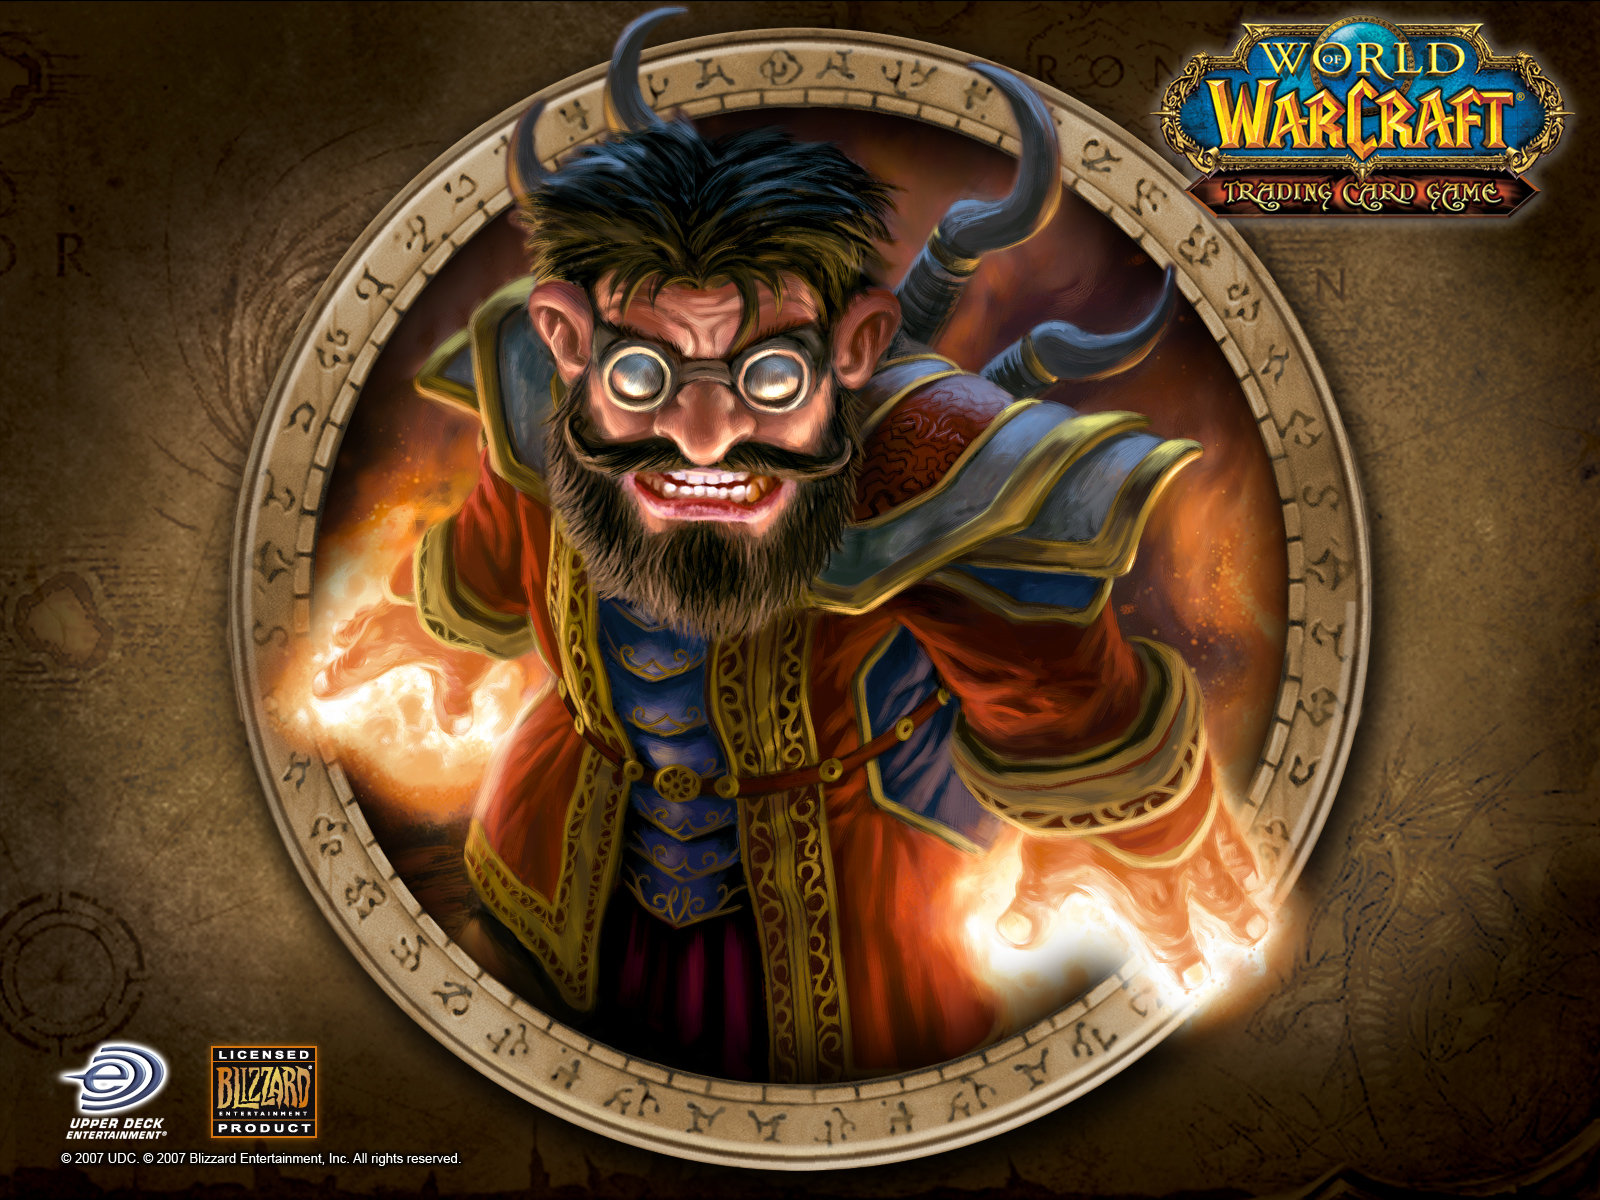 GNOME WOW 3 World Of Warcraft Trading Card Game Beard Blizzard Entertainment 1600x1200